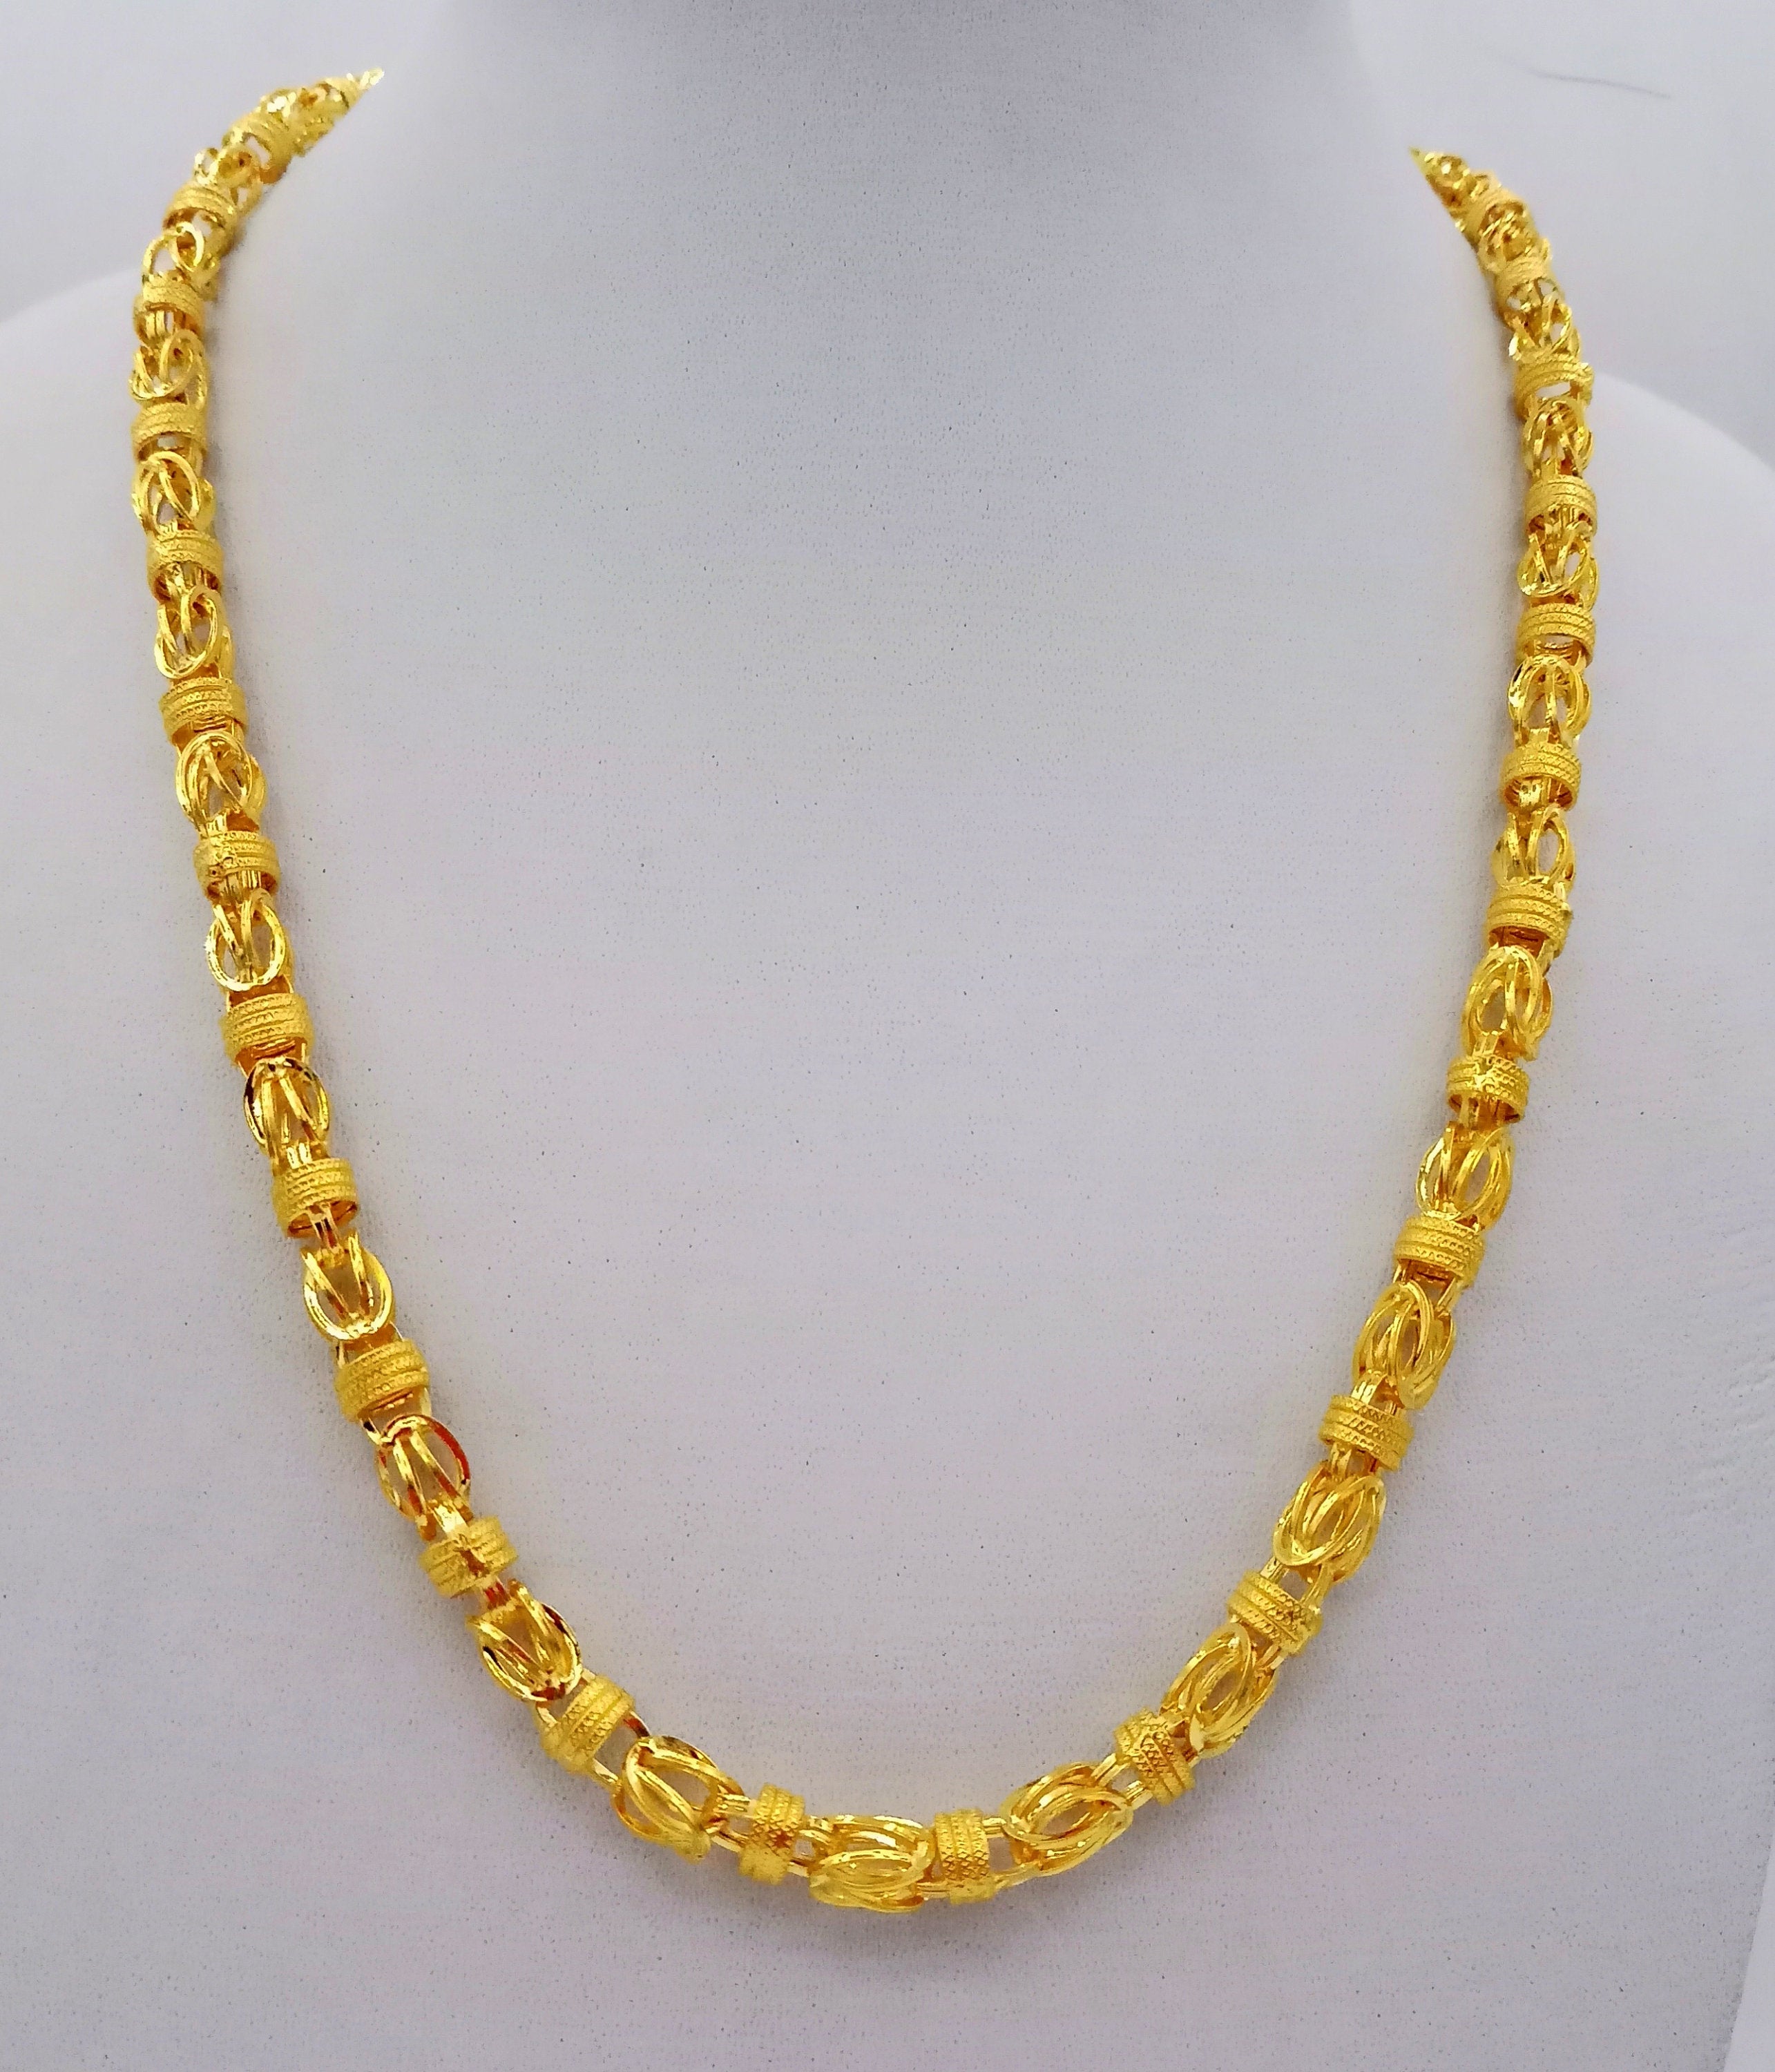 Solid Byzantine Chain Necklace 14K Yellow Gold 18